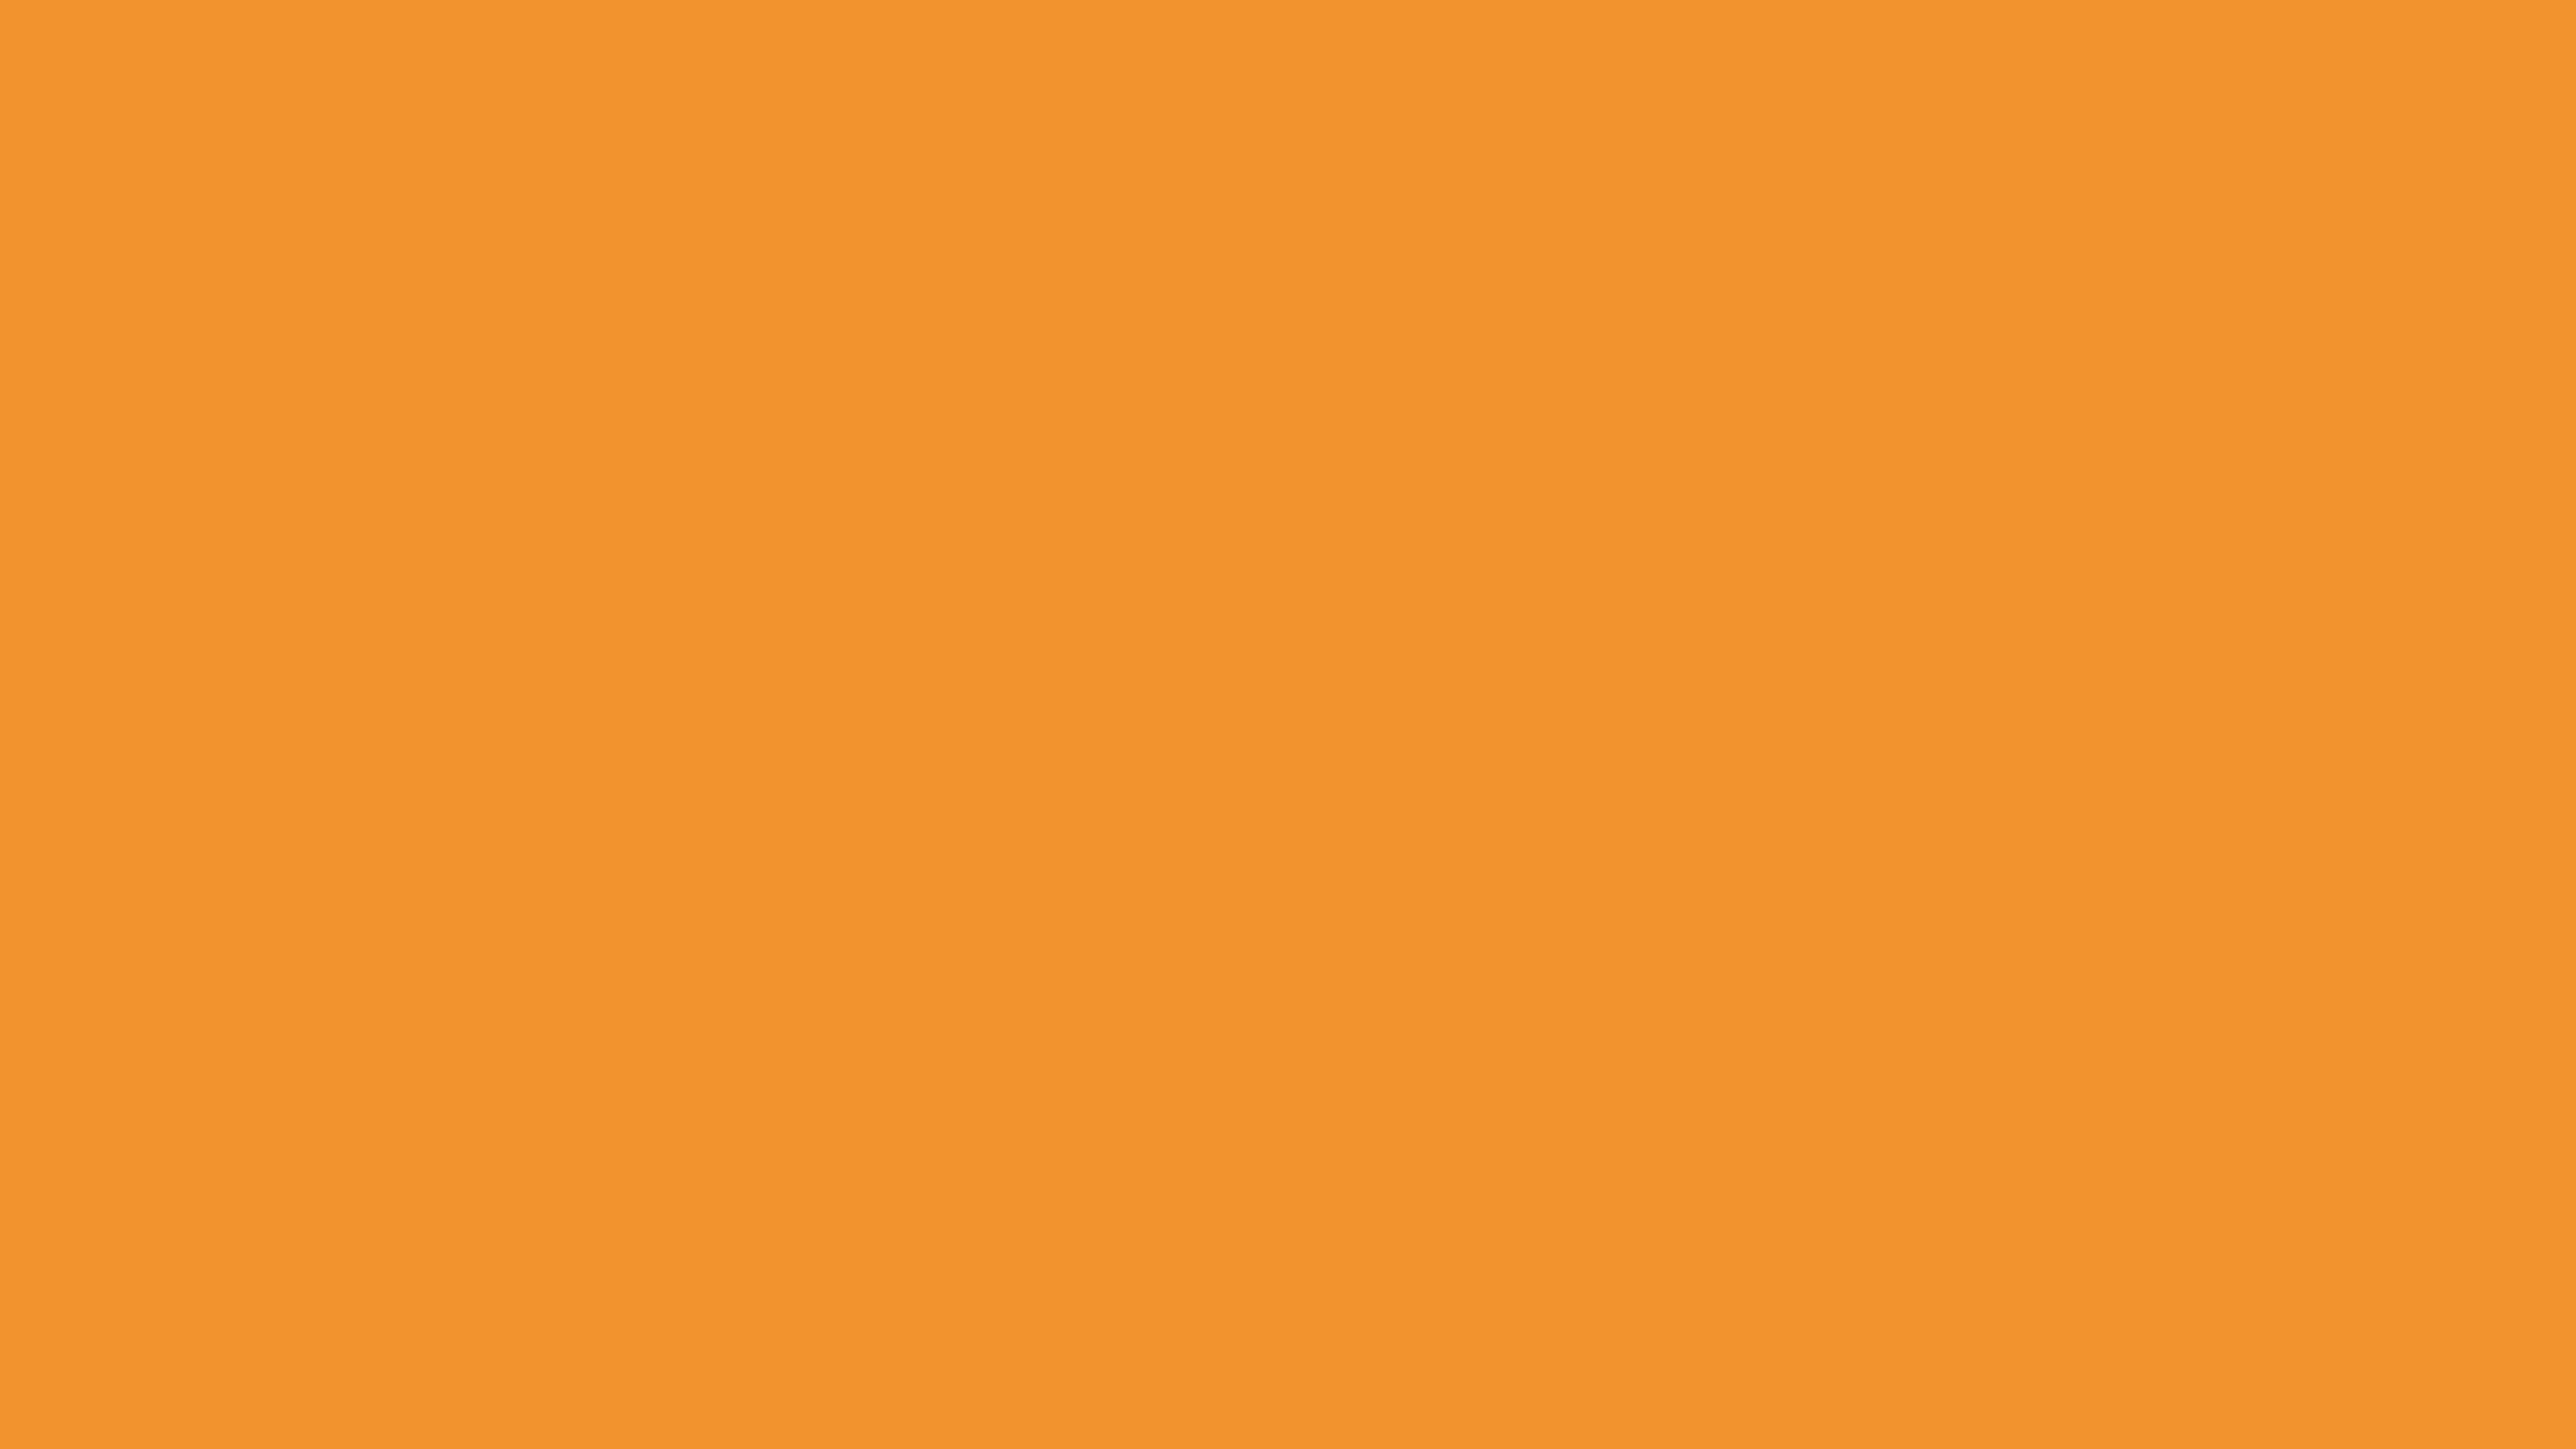 Pantone Almost Apricot #coloroftheday #march12 #thedailysocial